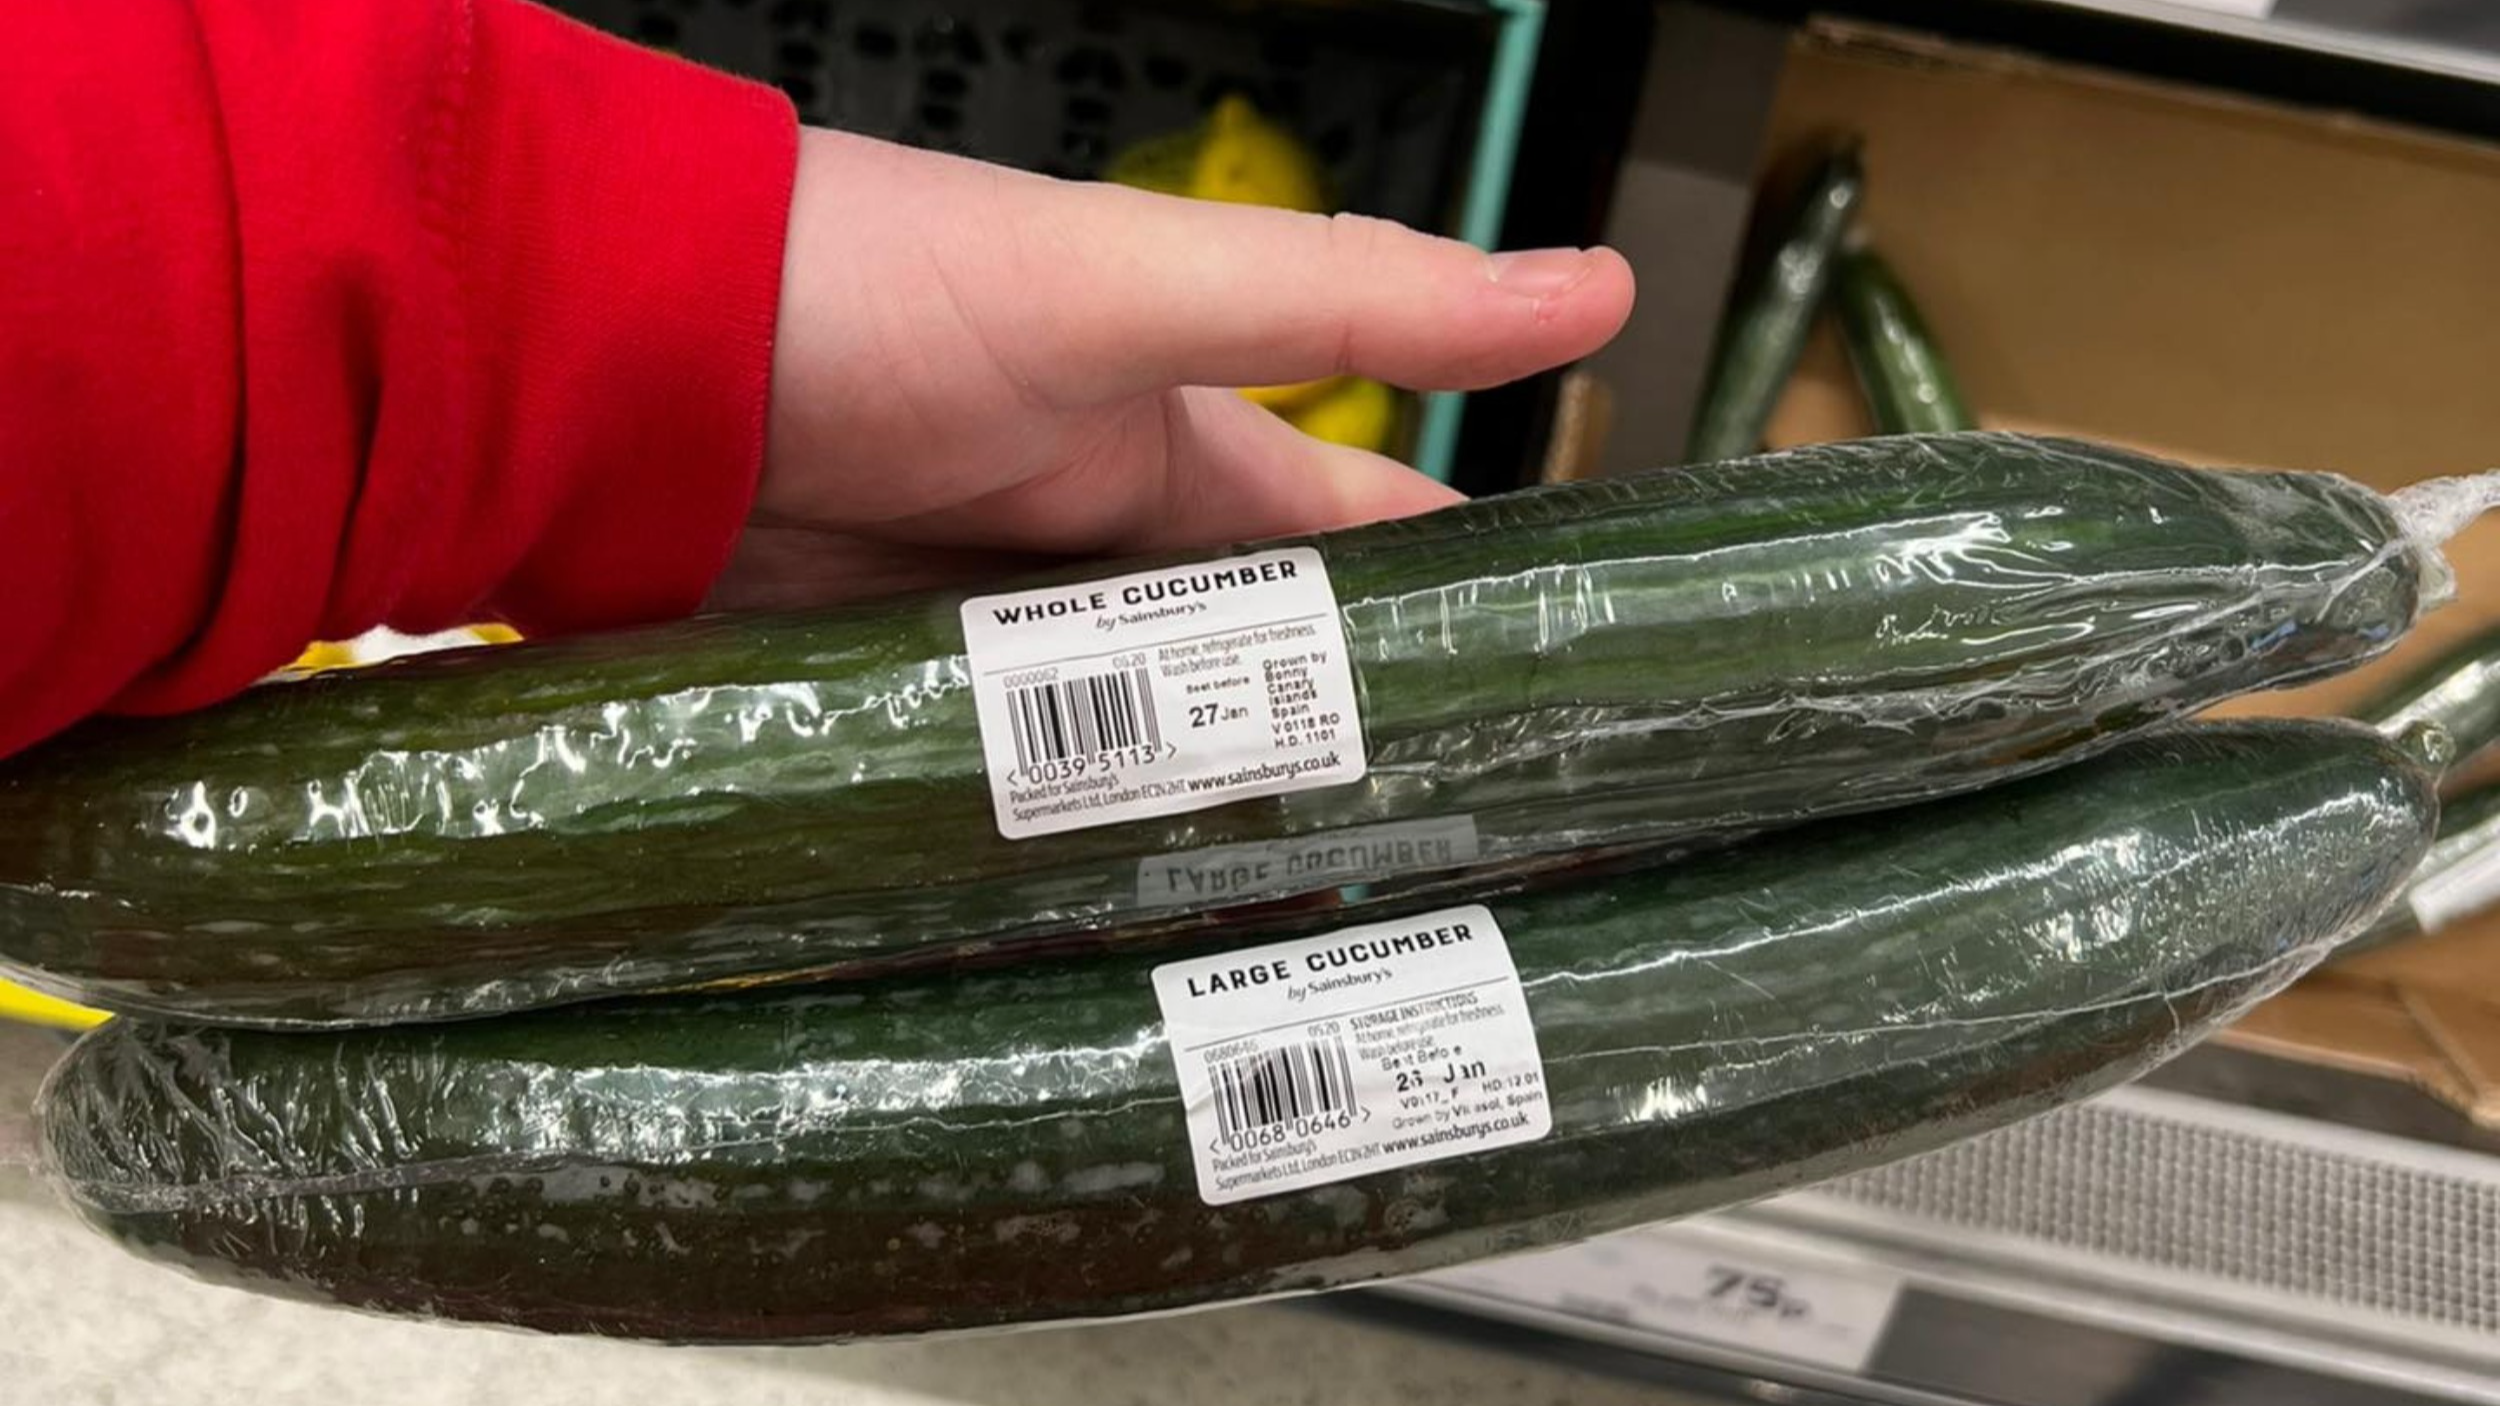 Sainsburys Customers Outraged By Price Of Extra Large Cucumber pic picture